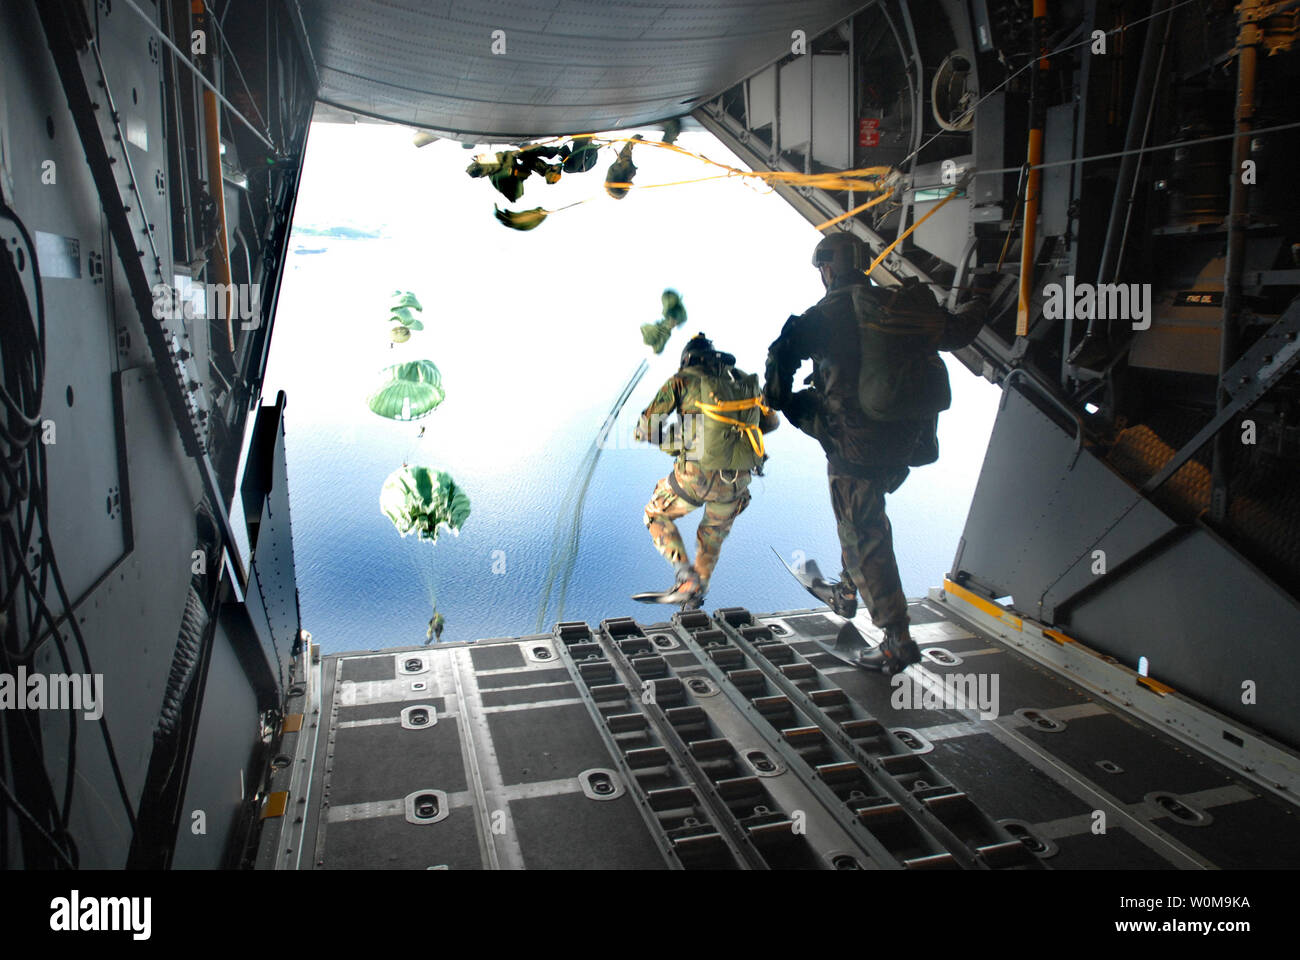 U.S. Air Force pararescuemen from the 31st Rescue Squadron, Kadena, Air Base, Japan, perform a static line jump over water out of a U.S. Air Force C-130 cargo plane on August 29, 2006. The 18th Wing and the 353rd Special Operations Group conducted the mass casualty exercise to test the rescue and emergency care capabilities of Kadena Air Base. (UPI Photo/Jeremy McGuffin/USAF) Stock Photo